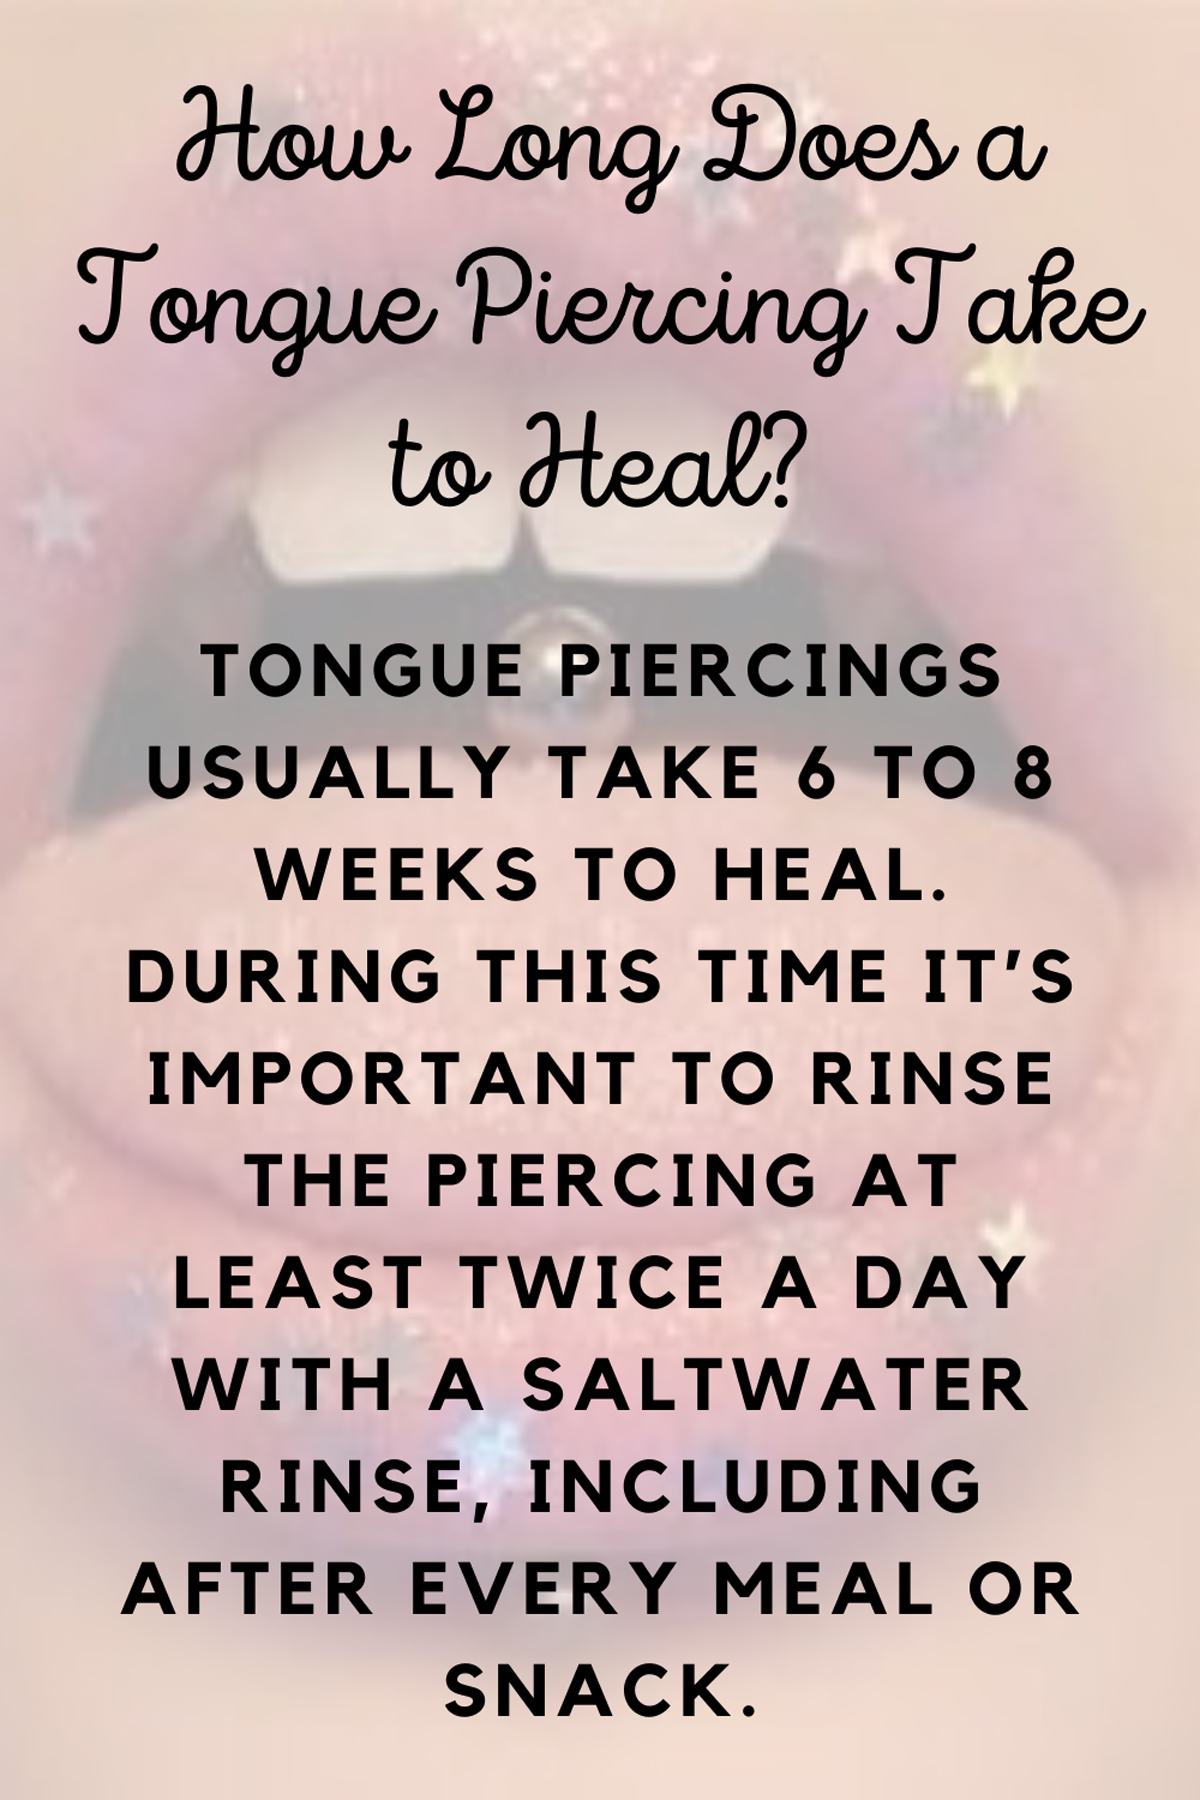 How Long Does a Tongue Piercing Take to Heal